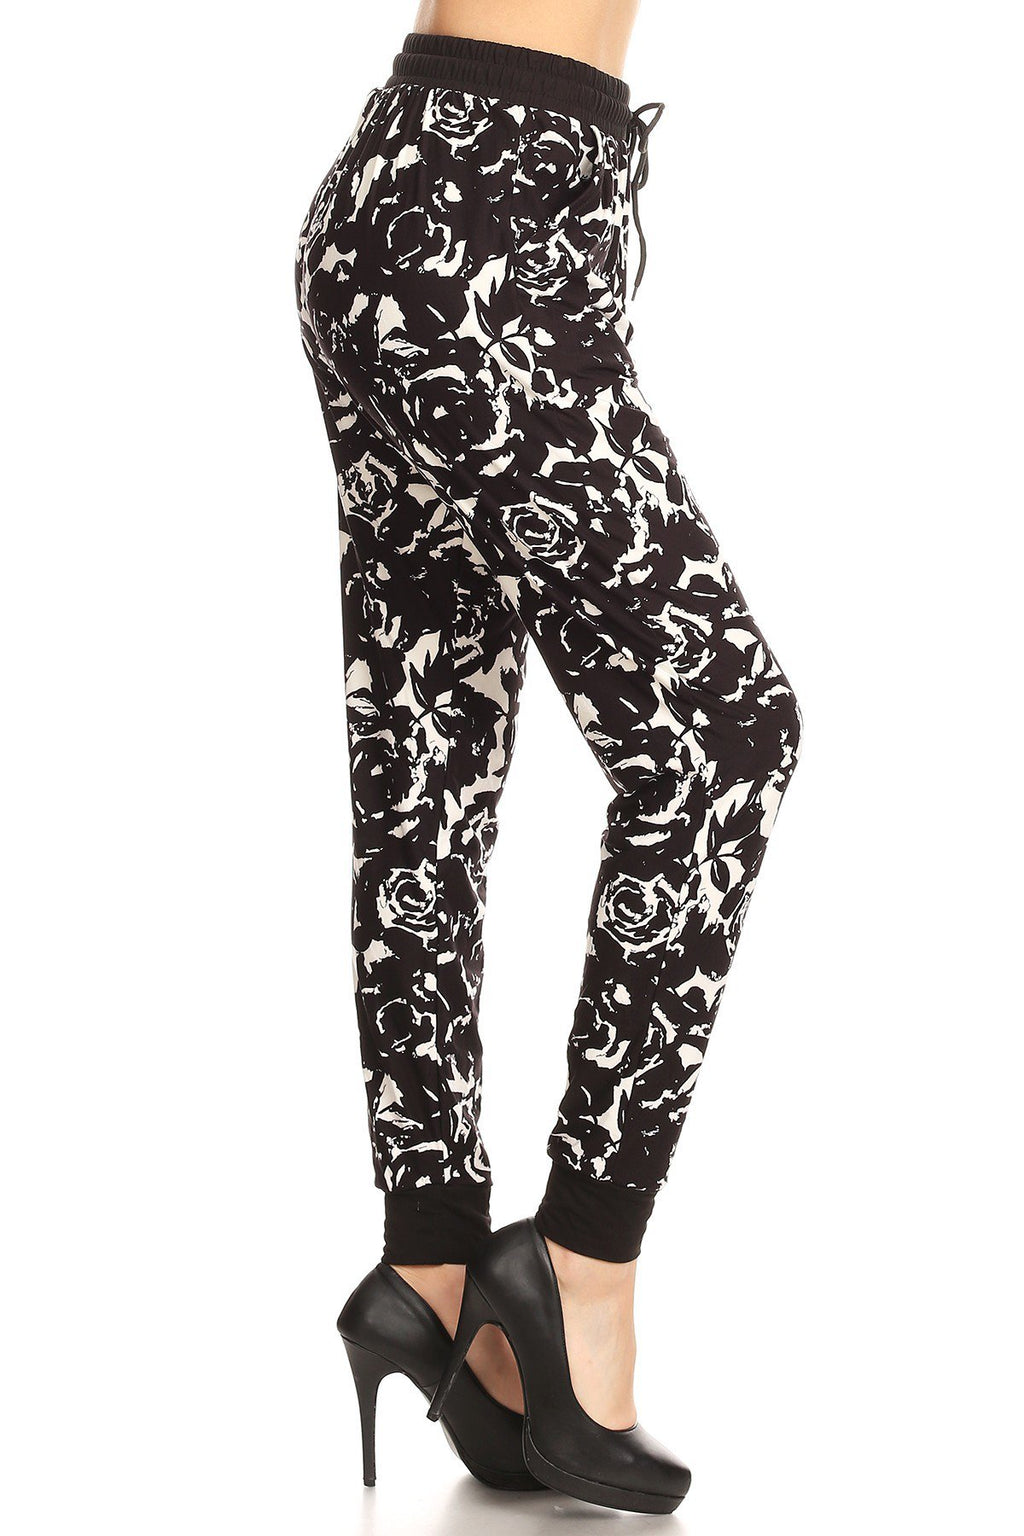 MIXED FLORAL  joggers with solid trim, drawstring waistband, waist pockets, and cuffed hems